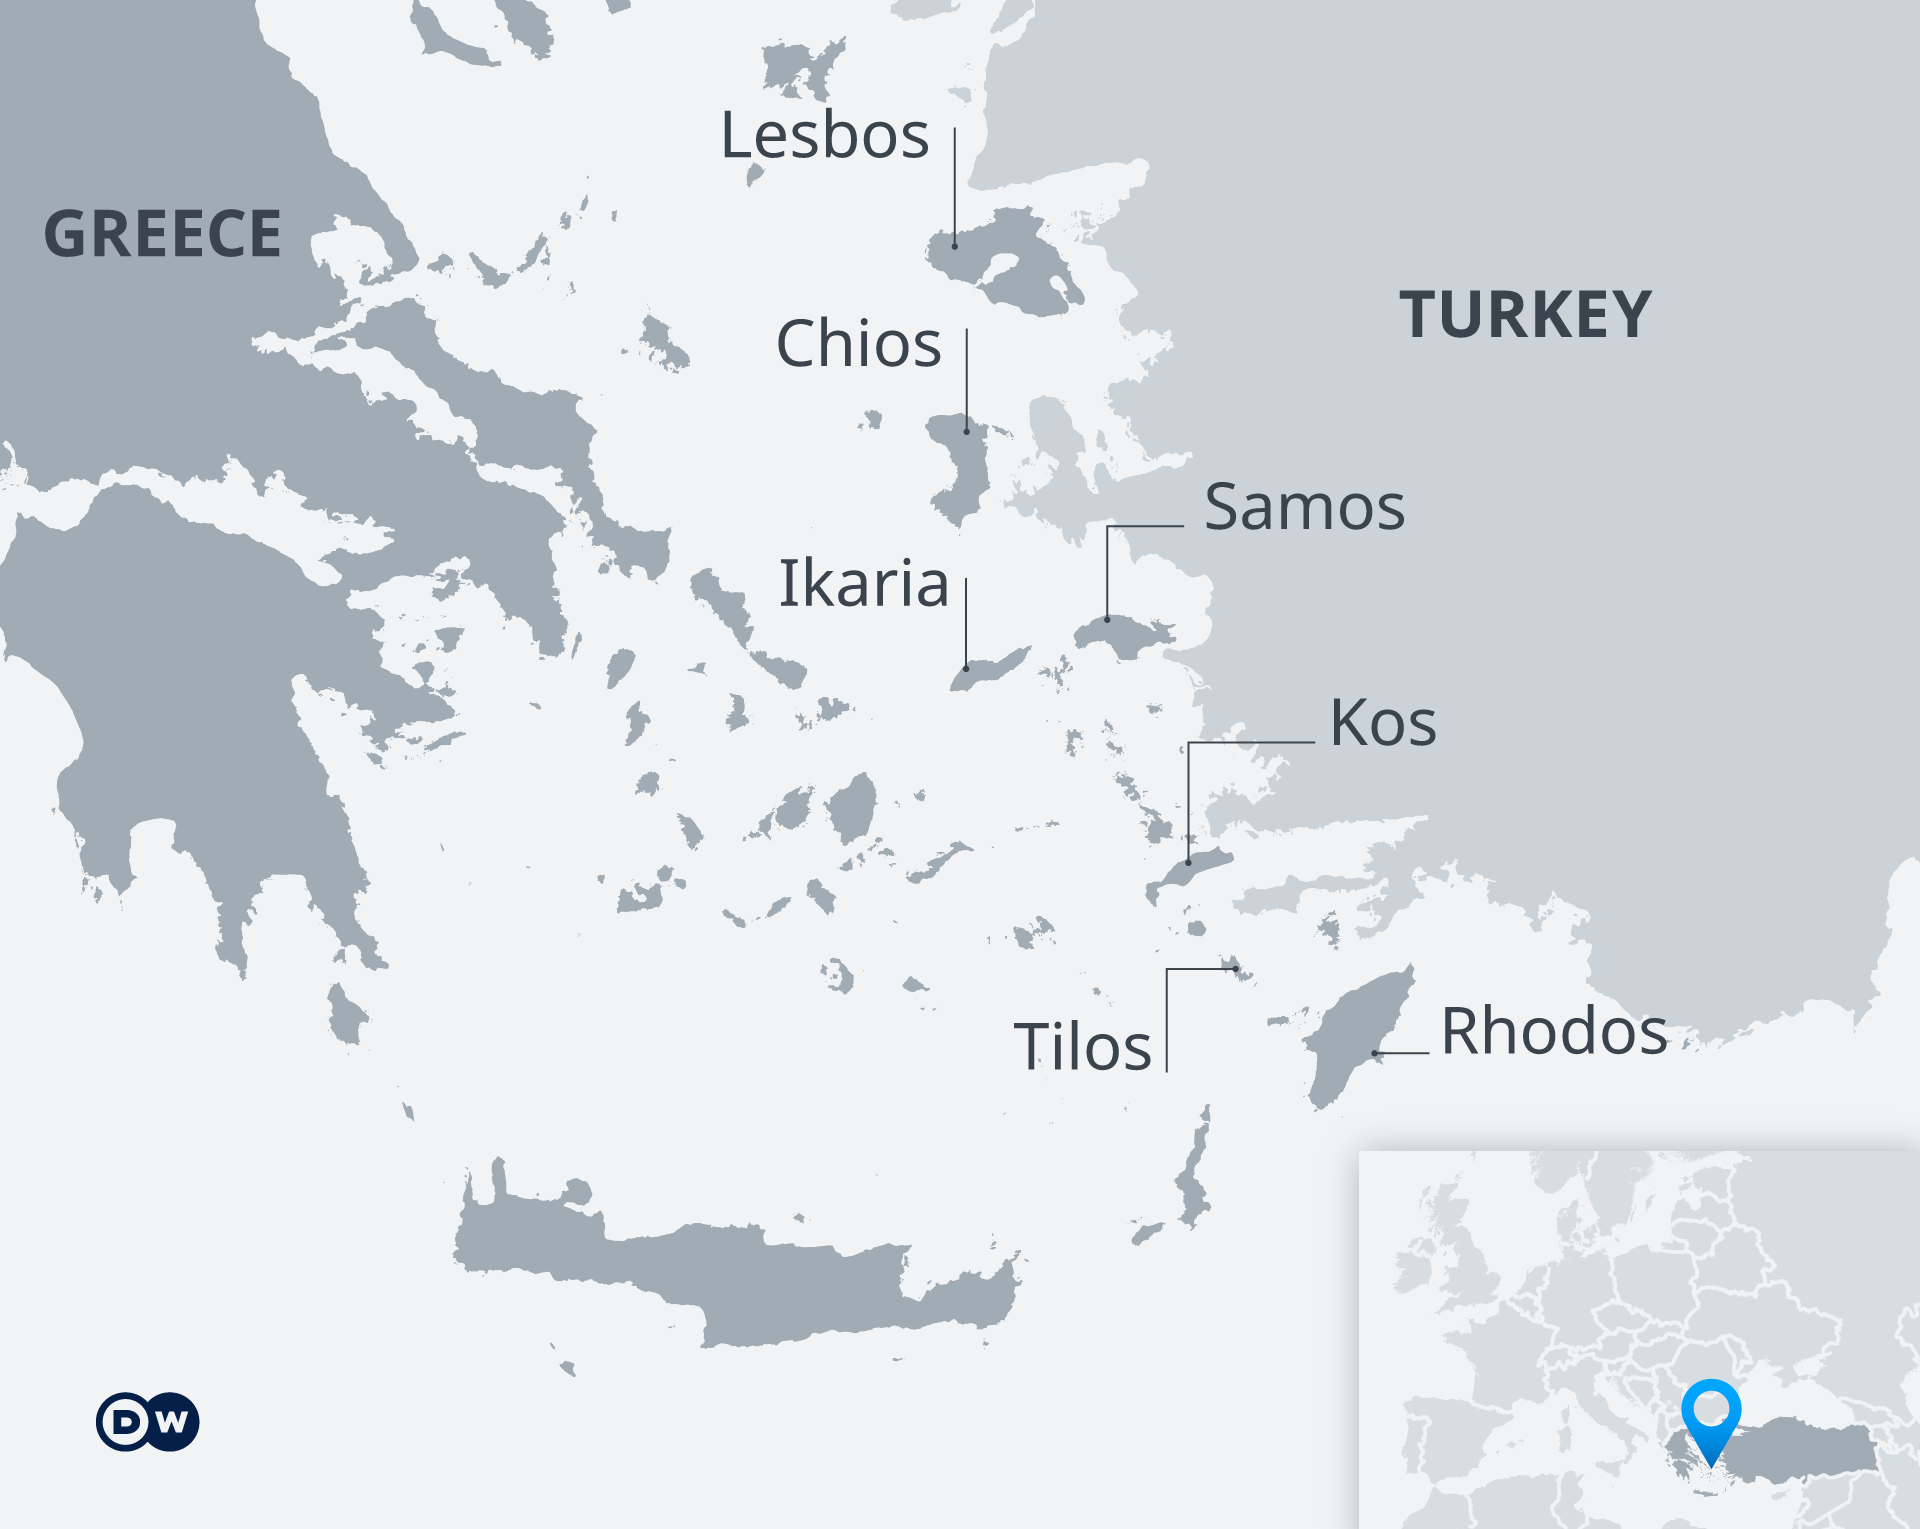 Graphic of Greek islands in the Aegean Sea (source: DW)